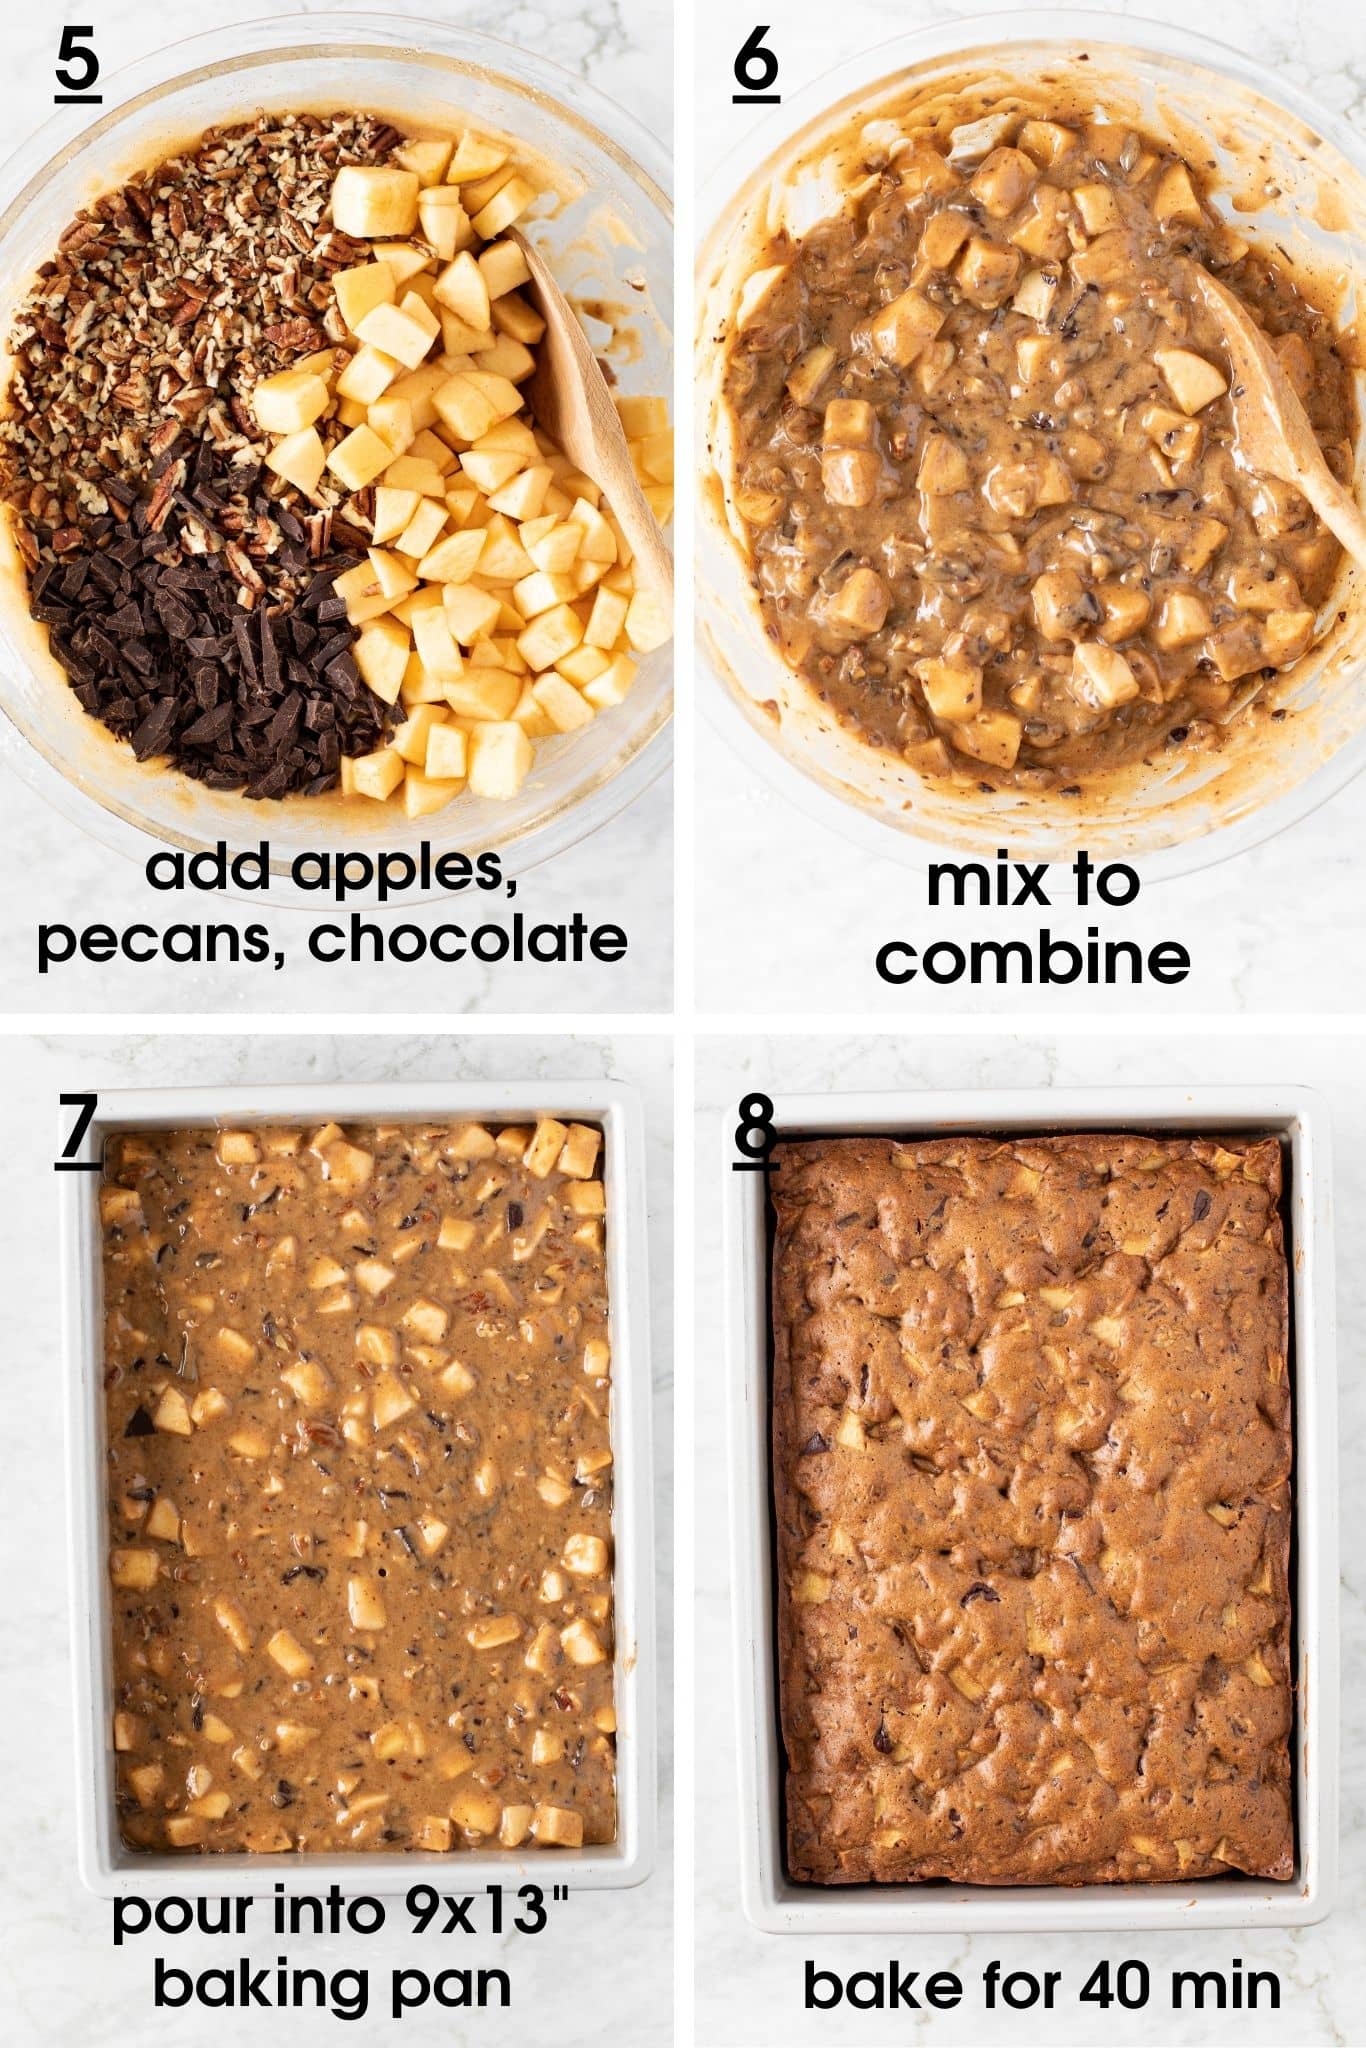 Steps showing how to make batter for Apple Pecan Chocolate Coffee Cake, pour it into a baking pan, and showing the finished, baked cake | from verygoodcook.com